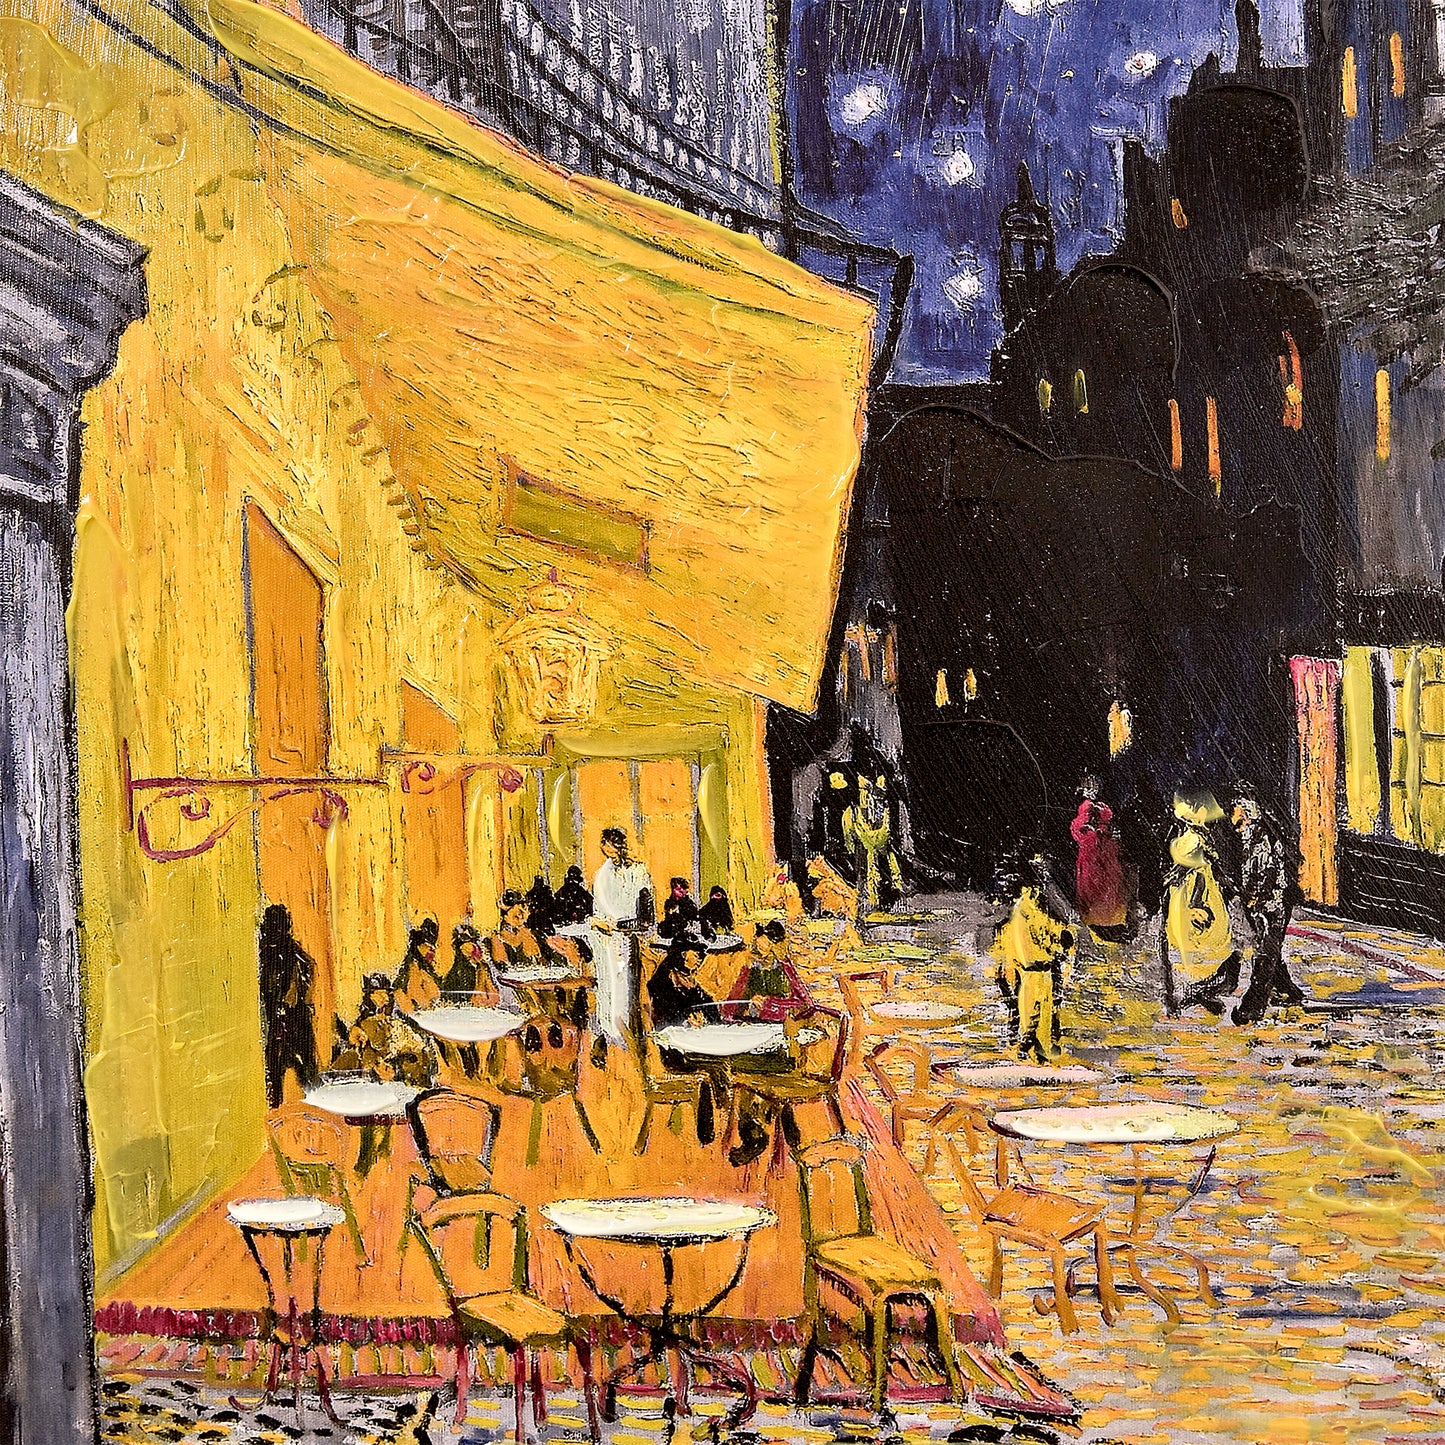 Ornate Framed Cafe Terrace at Night Canvas Print by Vincent van Gogh 28" x 31.75"